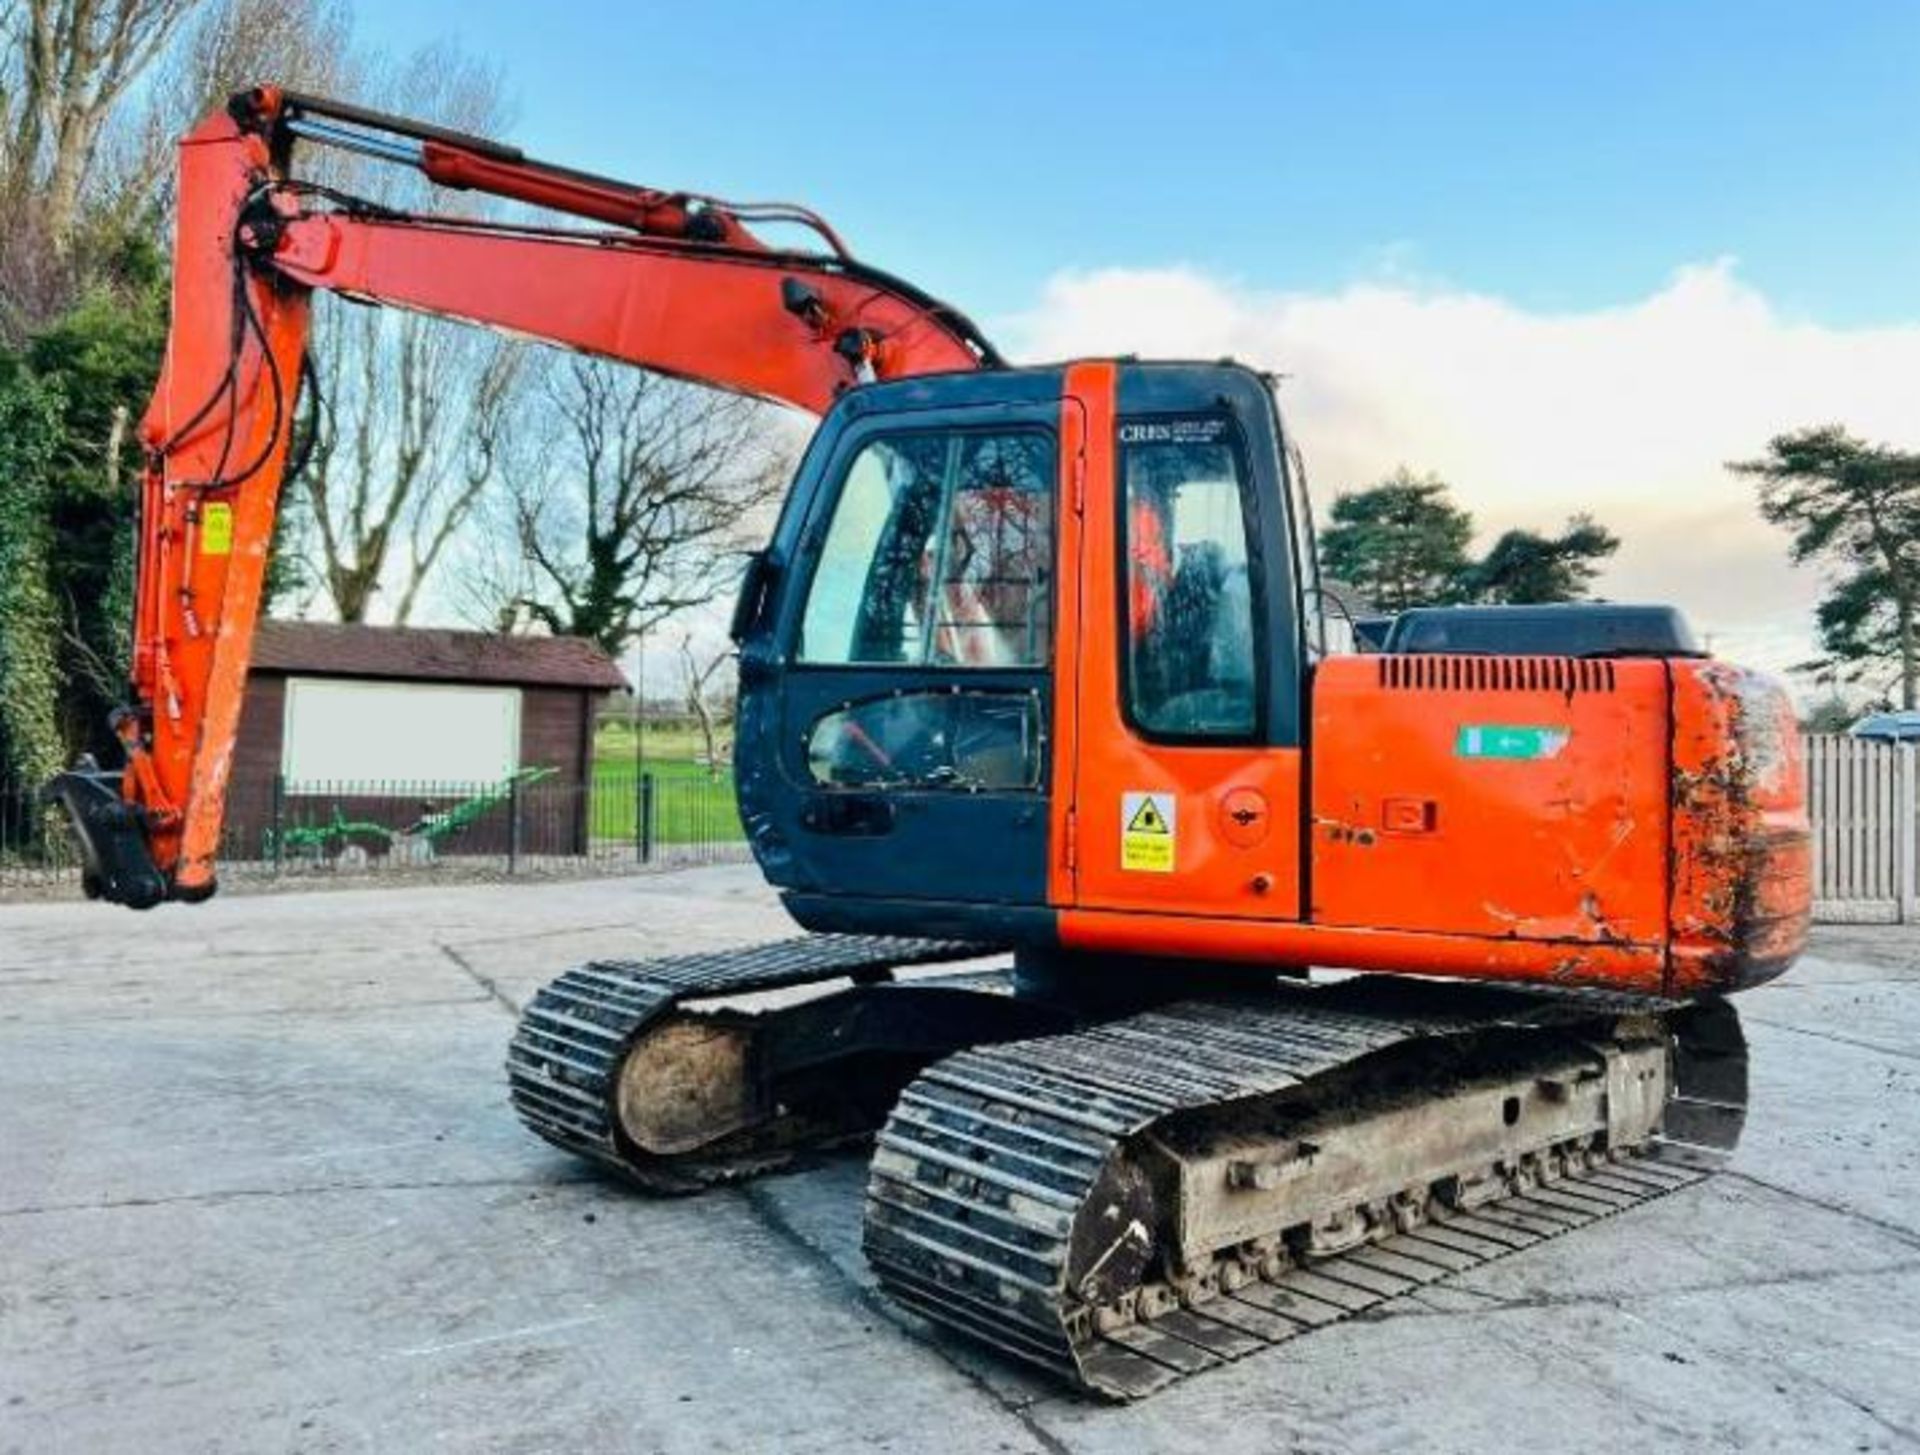 HITACHI ZAXIS ZX130LCN TRACKED EXCAVATOR C/W QUICK HITCH - Image 4 of 16